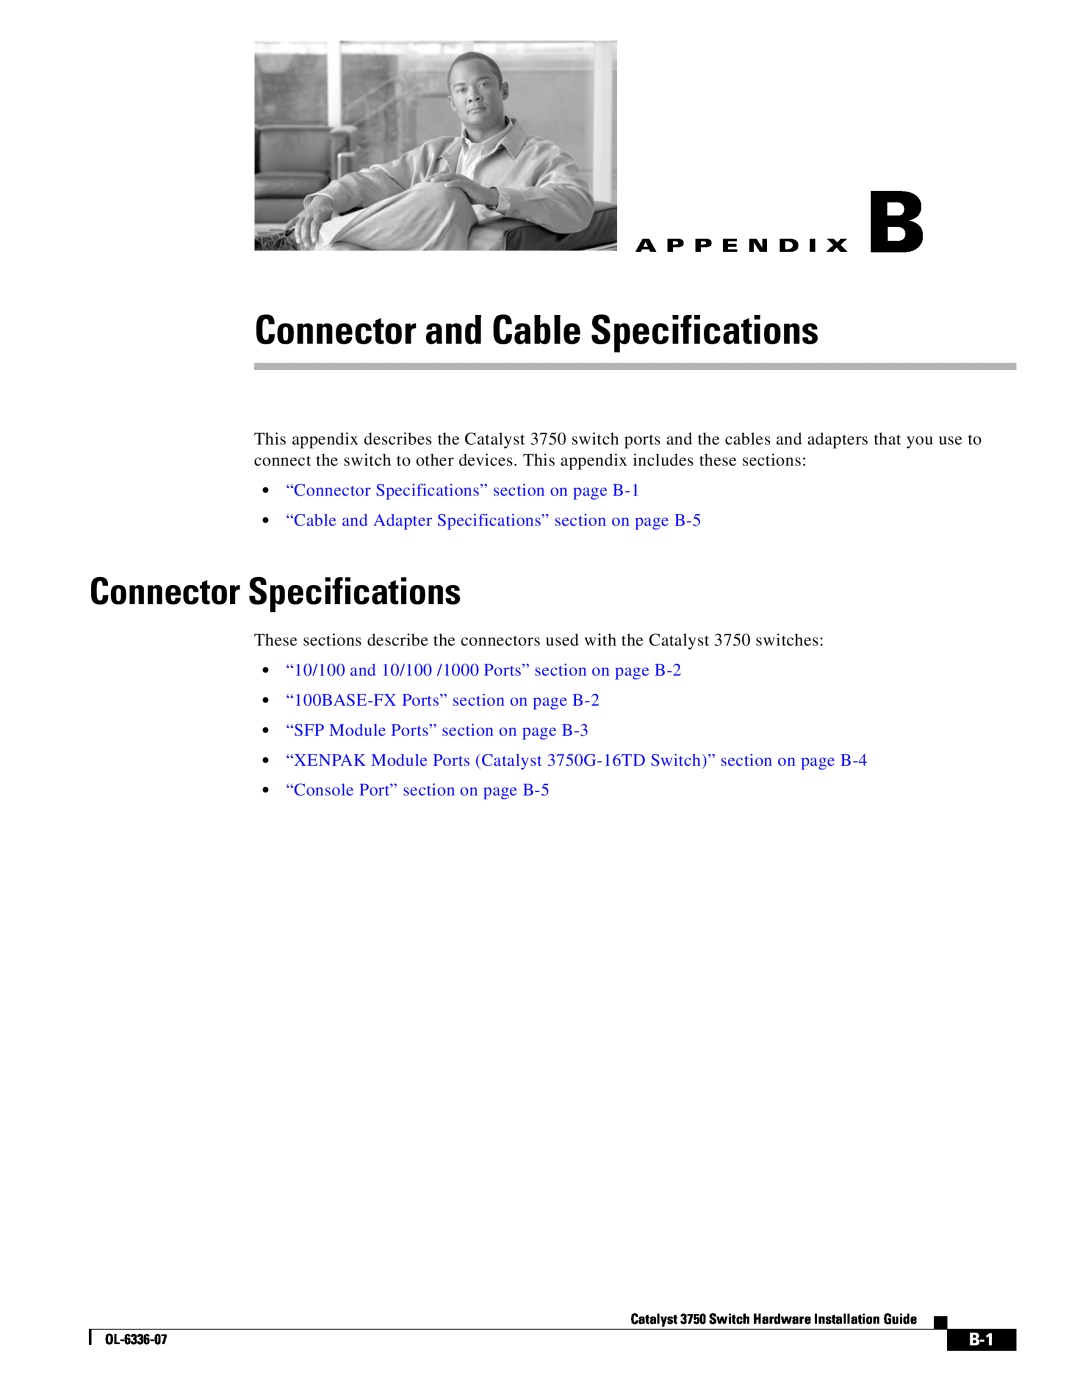 Cisco Systems WSC3750X24TS specifications Connector and Cable Specifications, Connector Specifications, A P P E N D I X B 